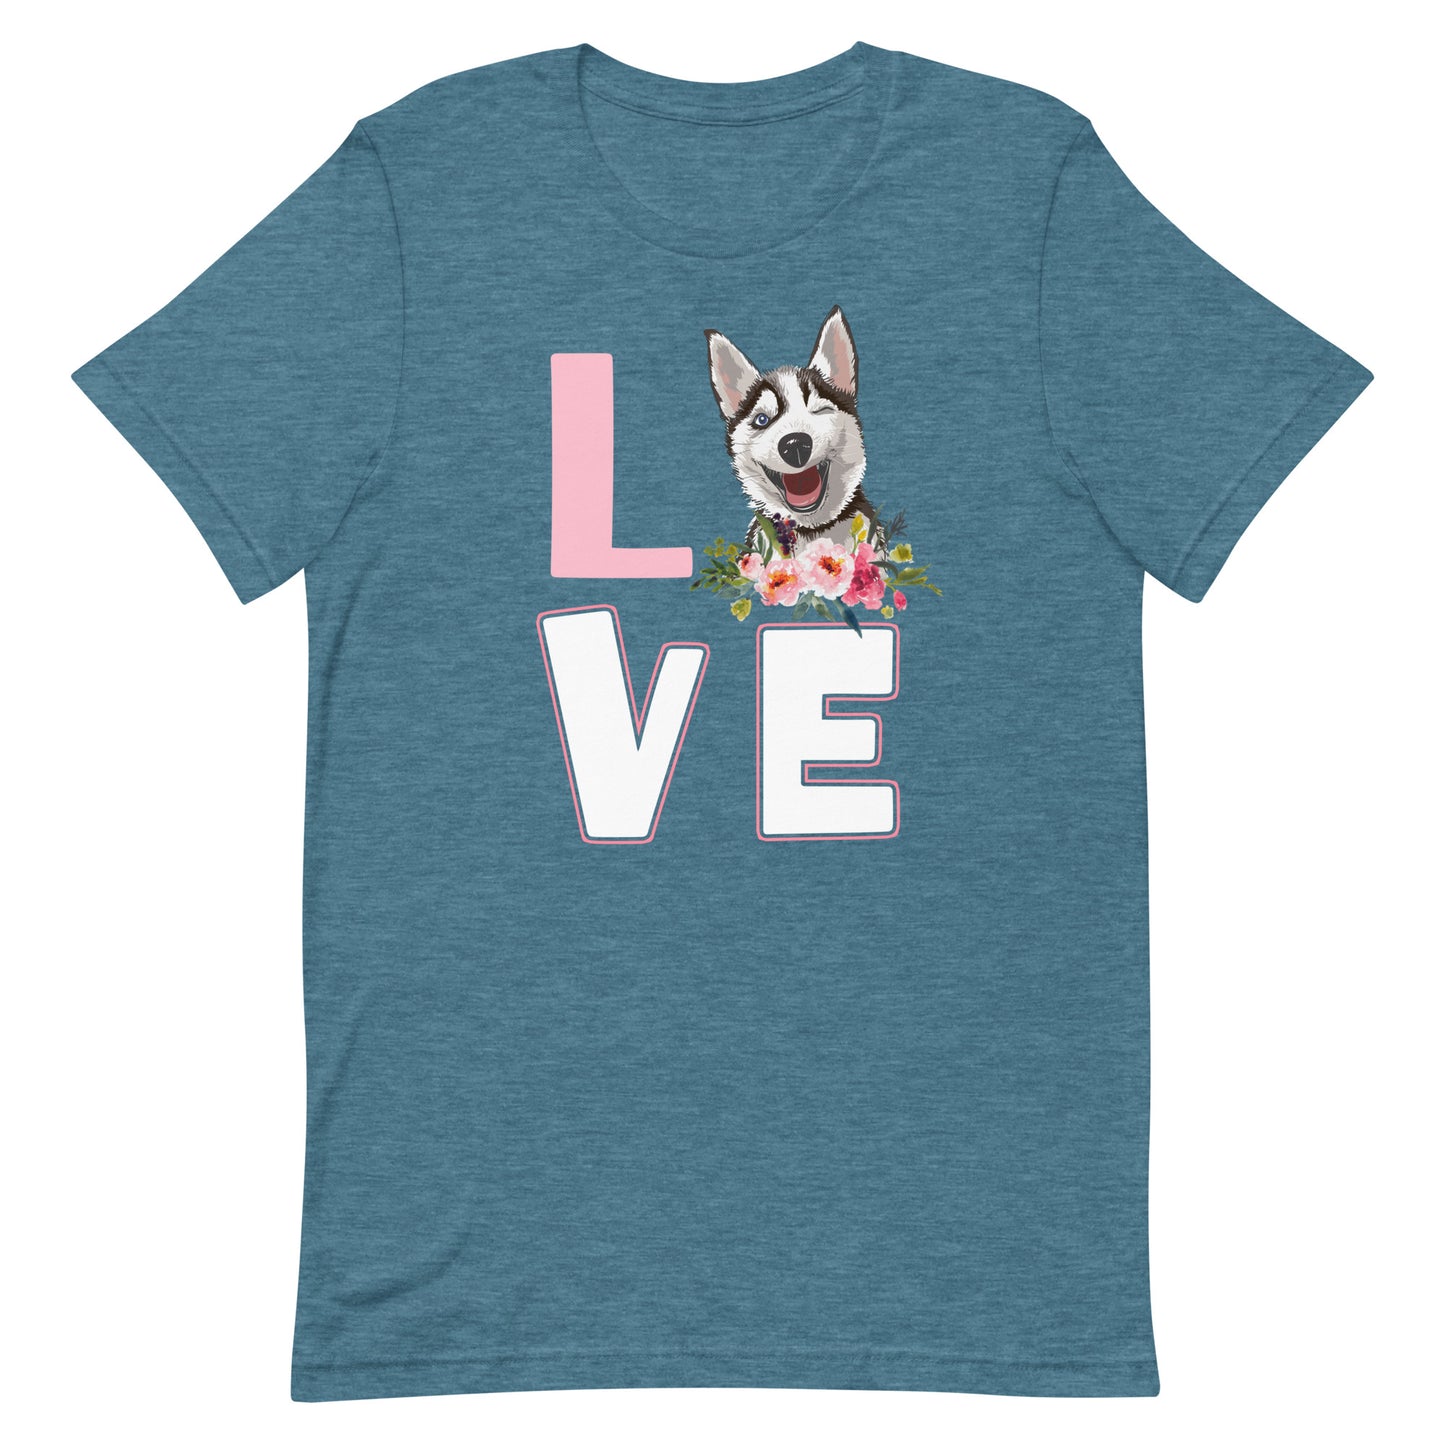 Dog Love T-Shirt for Dog Lovers